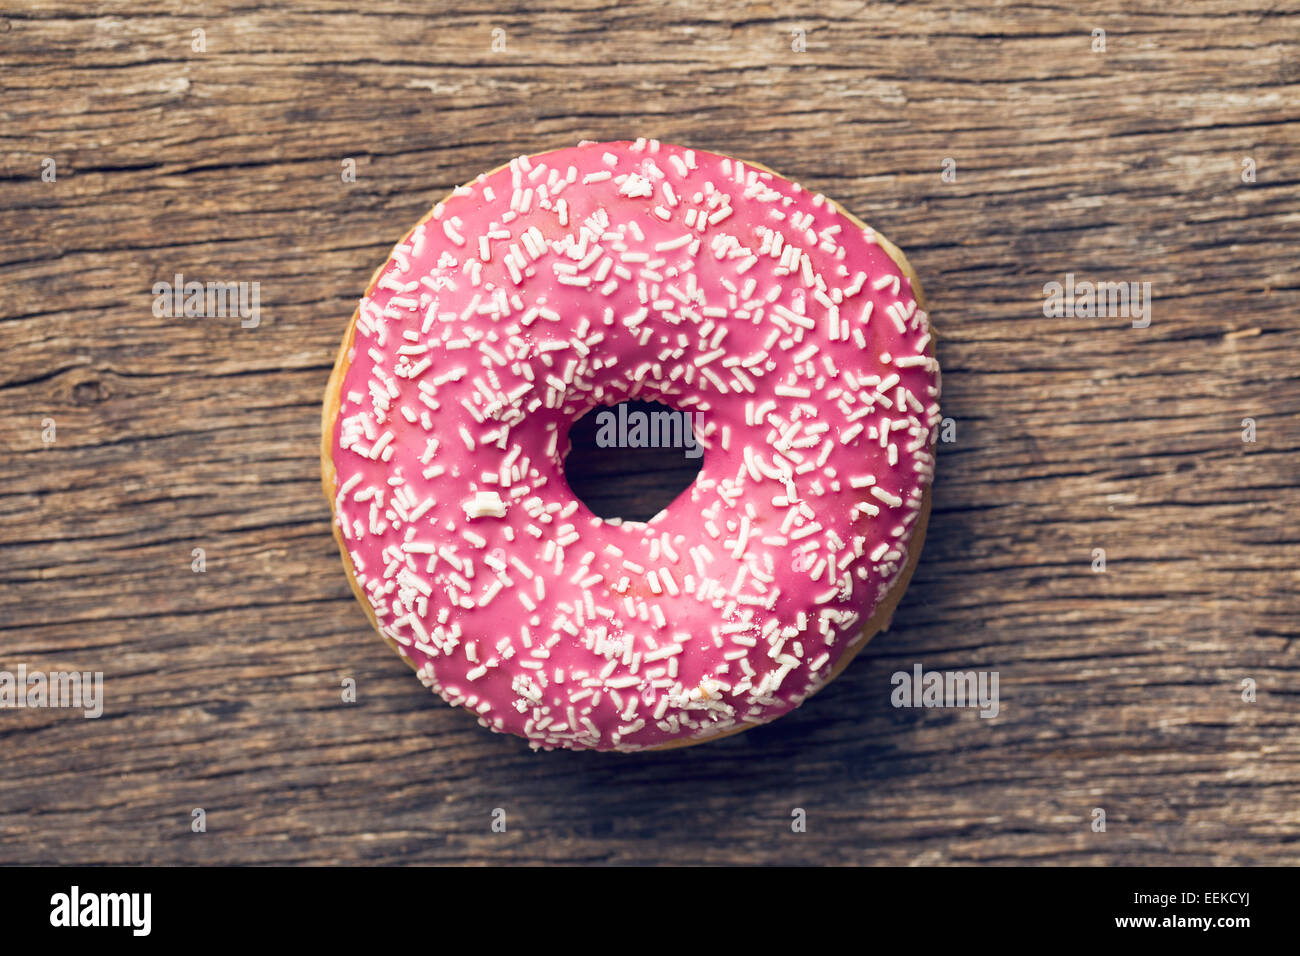 pink donut on old wooden background Stock Photo